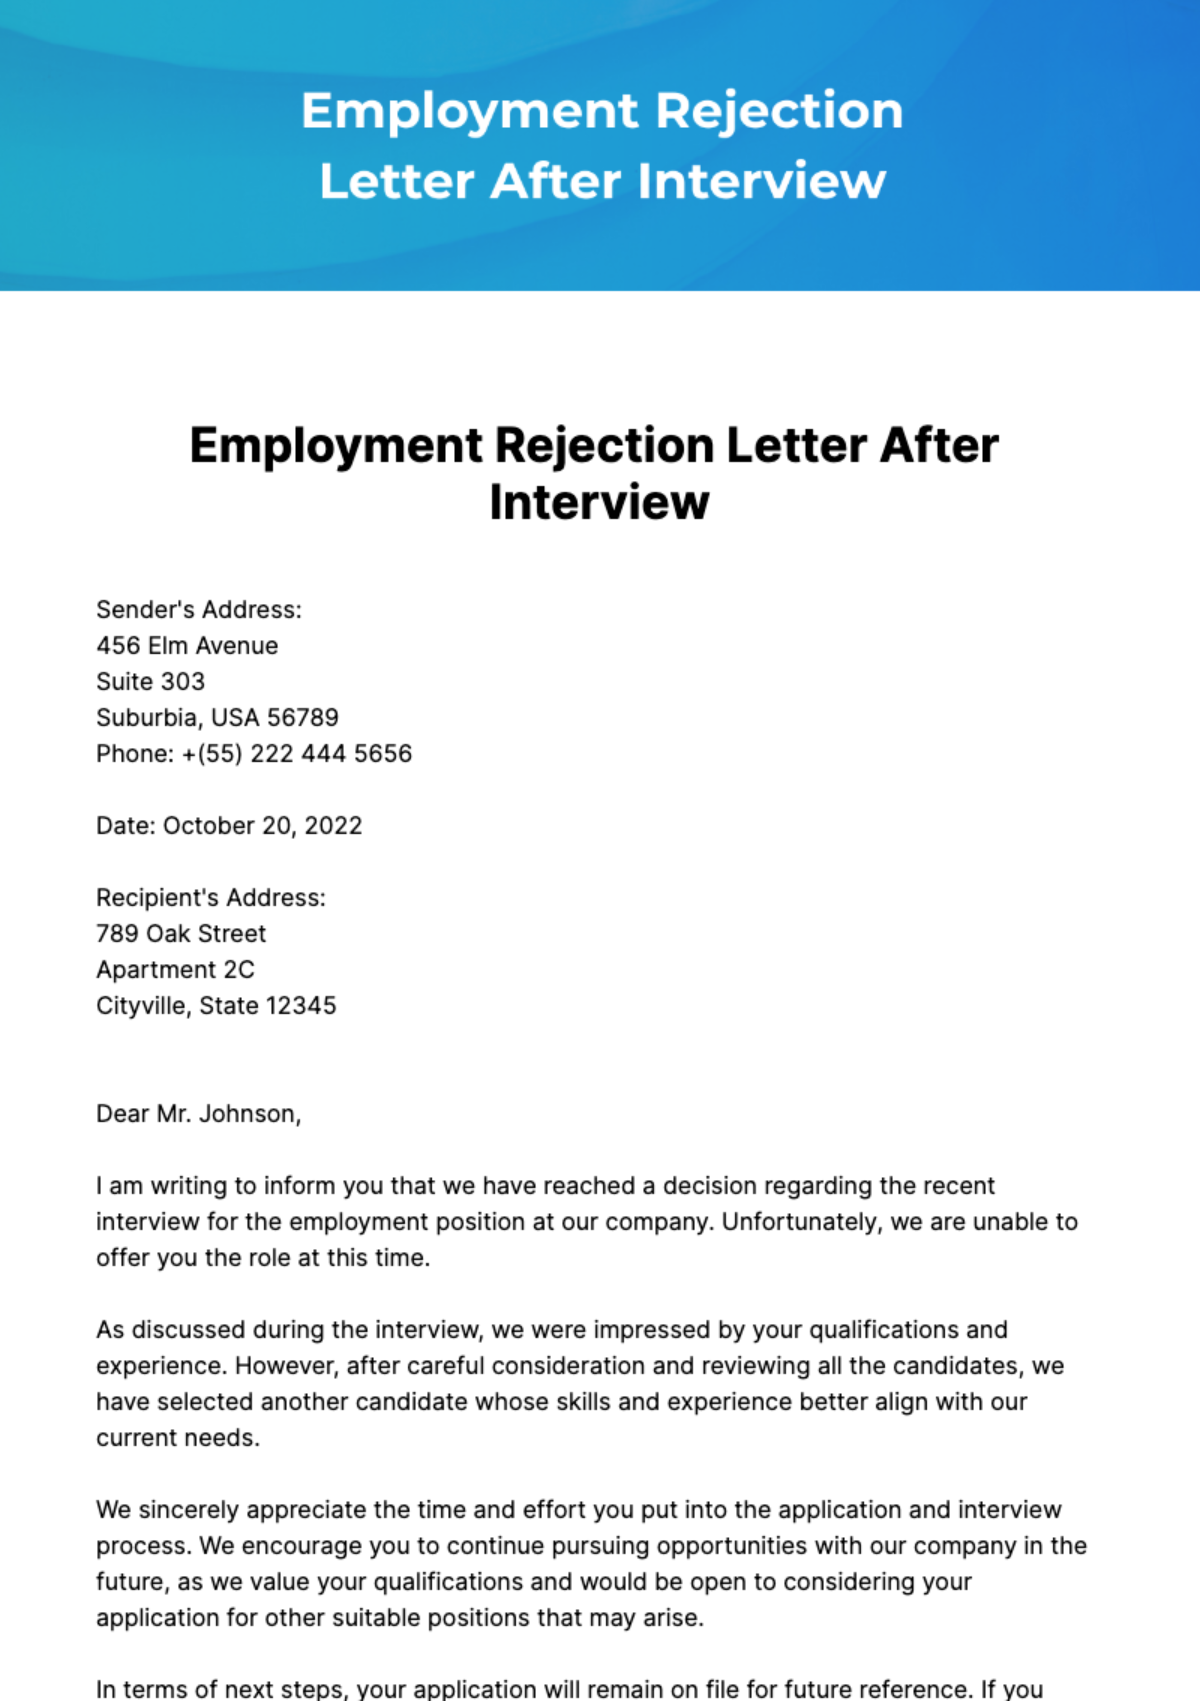 Free Employment Rejection Letter After Interview Template